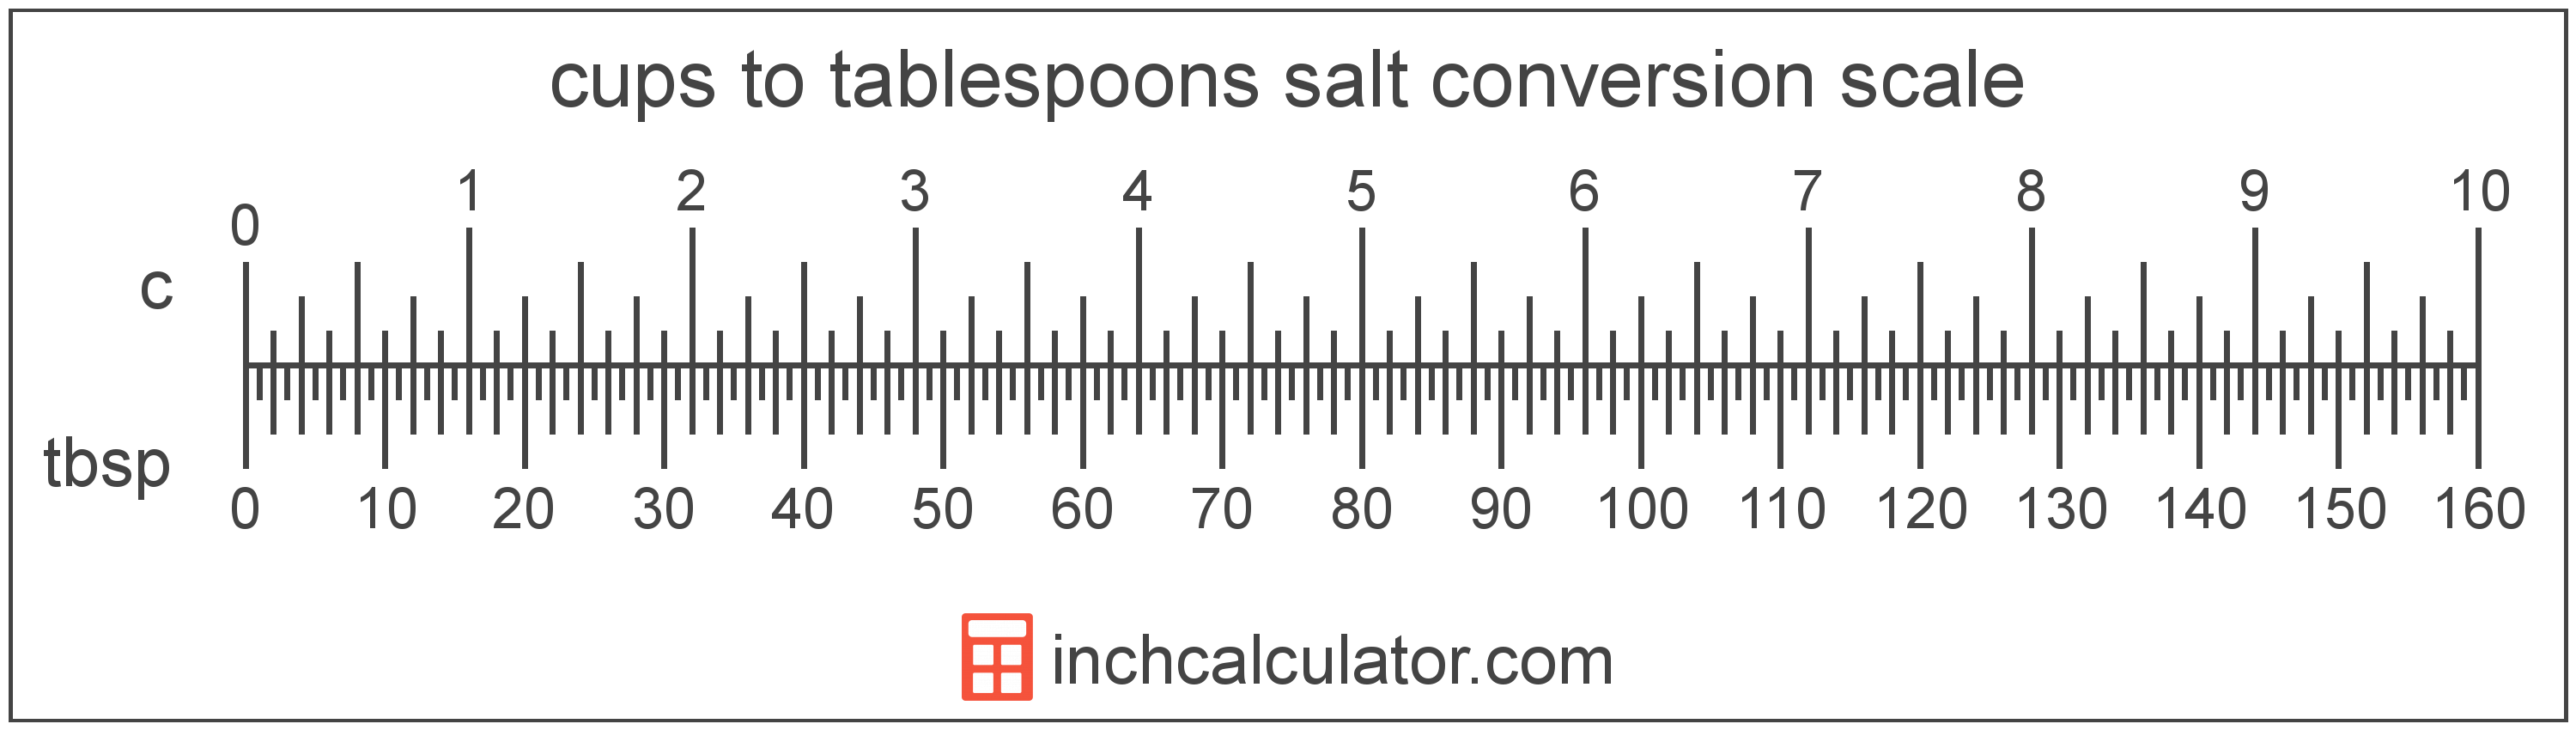 Tablespoons of Salt to Cups Conversion (tbsp to c)